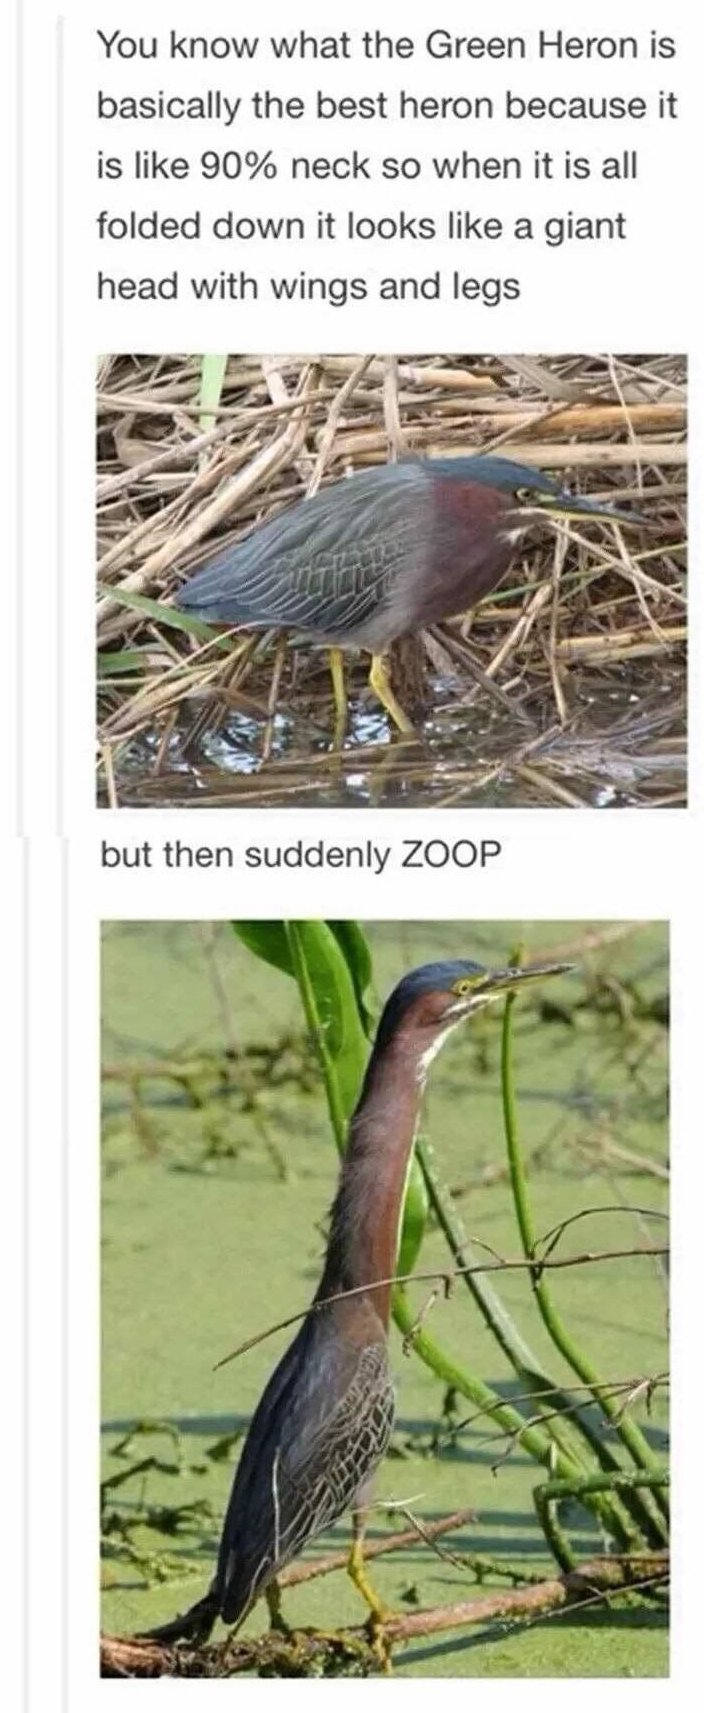 green heron meme - You know what the Green Heron is basically the best heron because it is 90% neck so when it is all folded down it looks a giant head with wings and legs but then suddenly Zoop